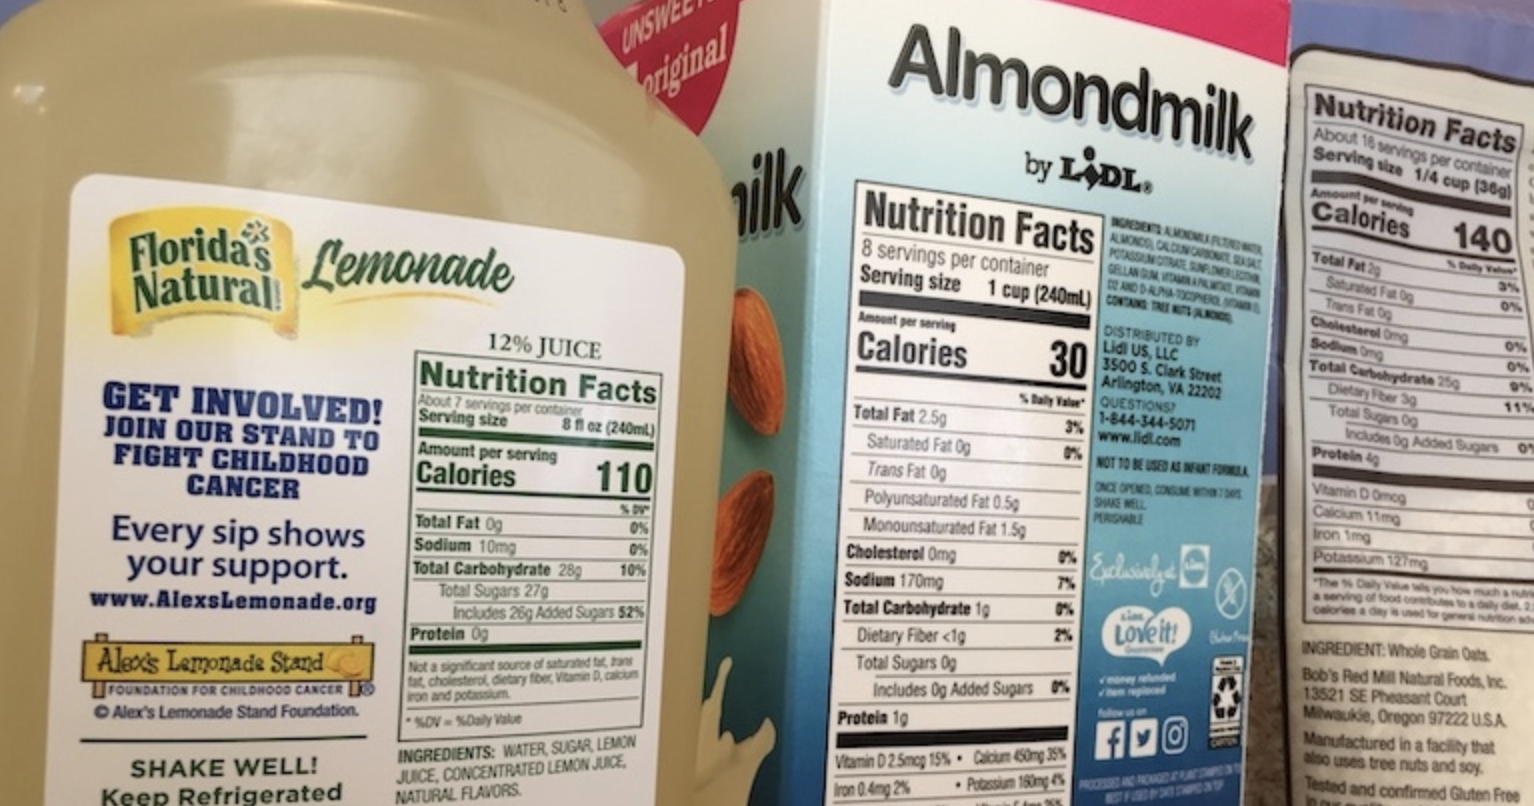 New Nutrition Facts label rolled out by FDA.